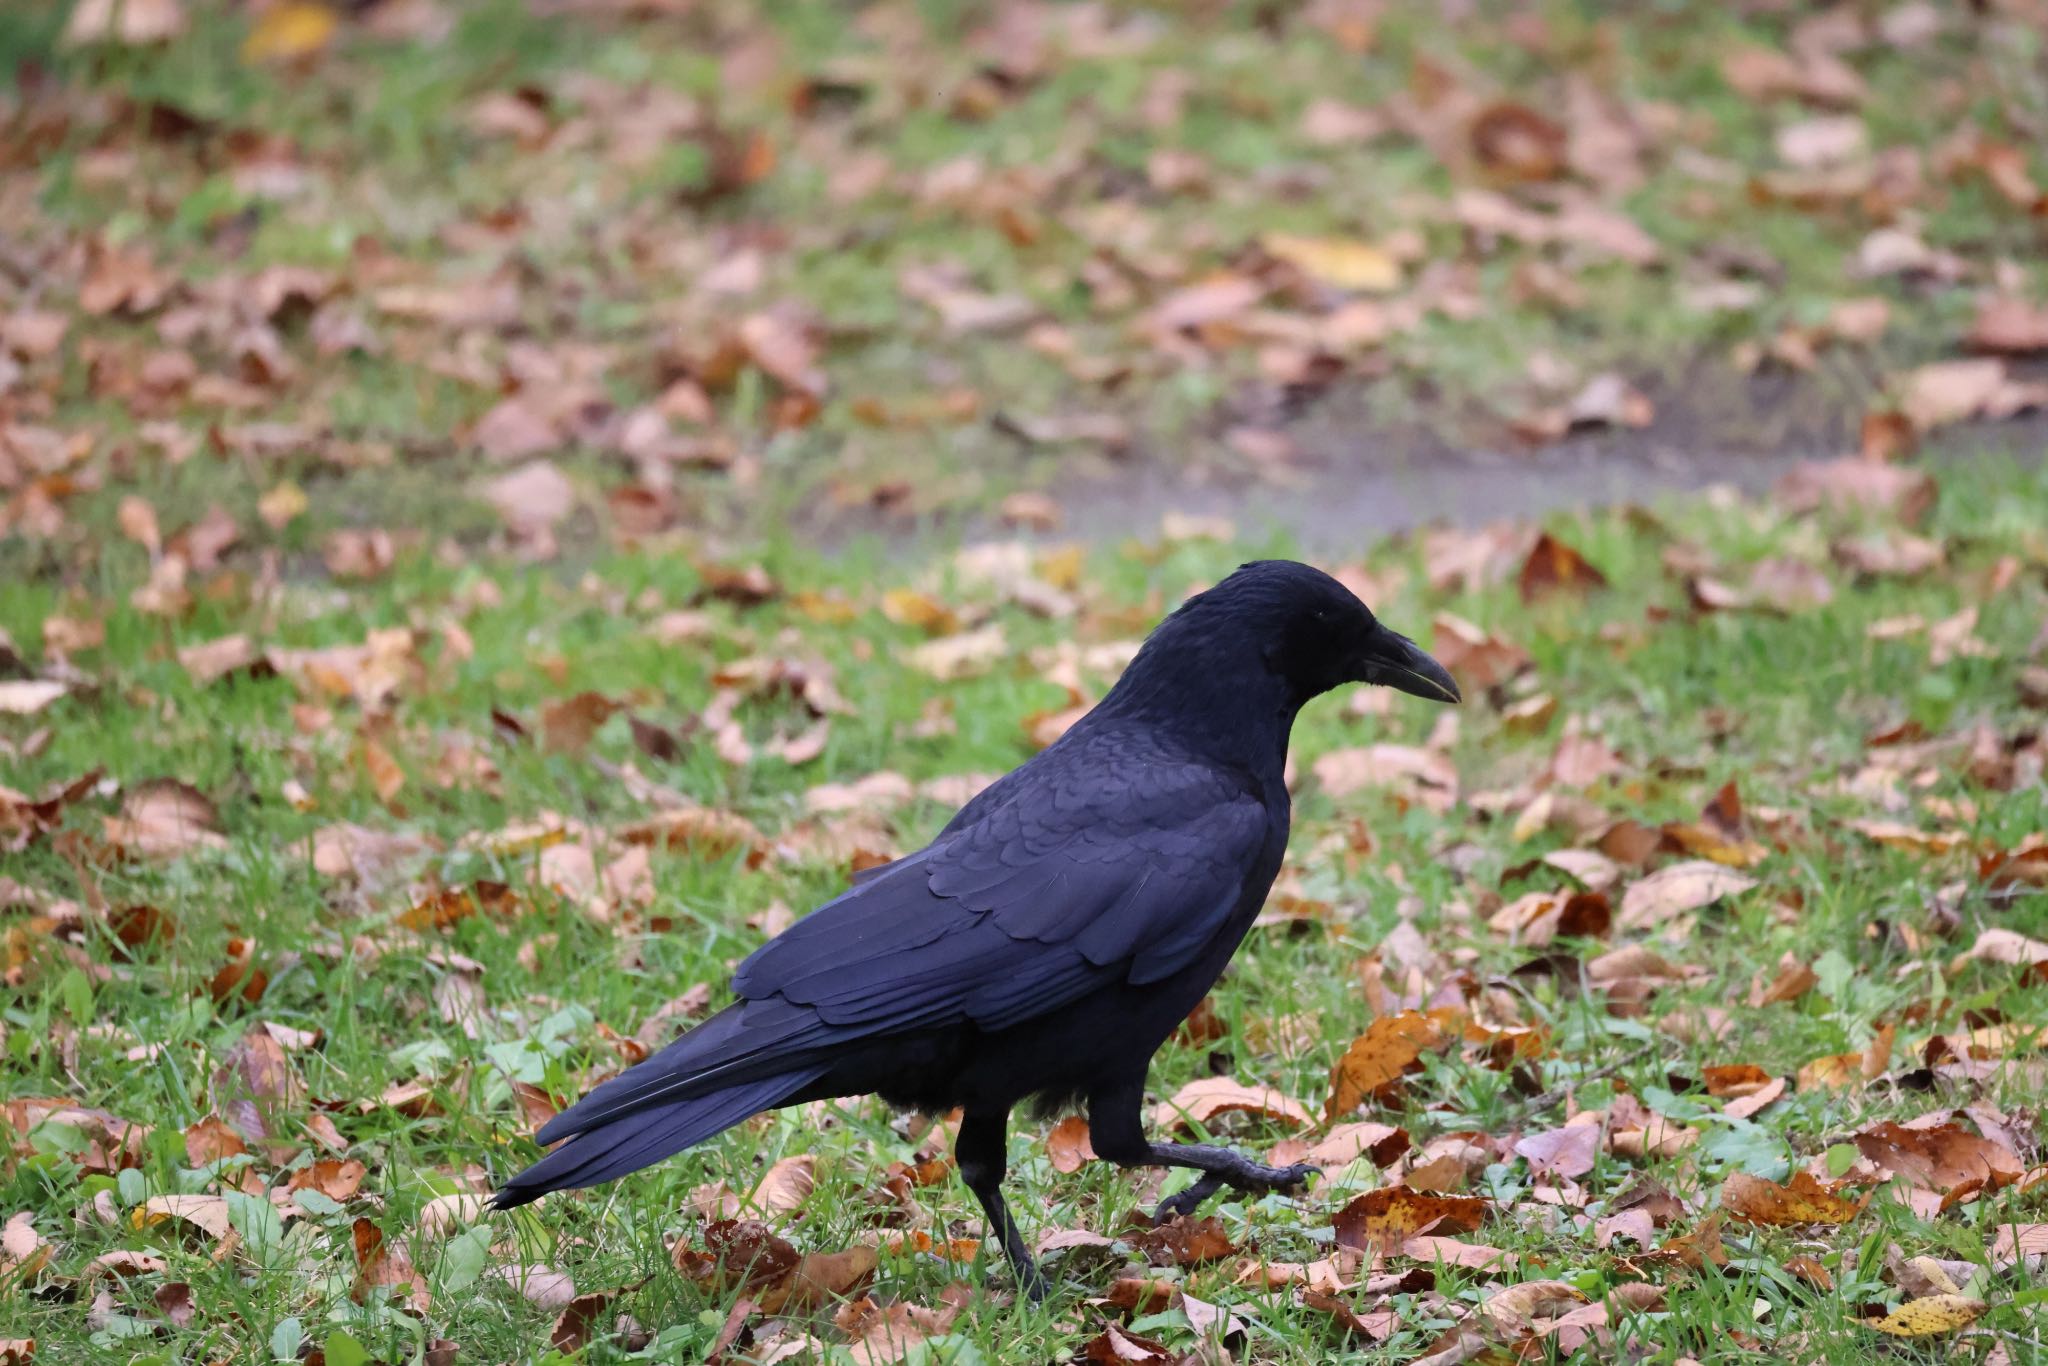 Photo of Carrion Crow at あいの里公園 by will 73